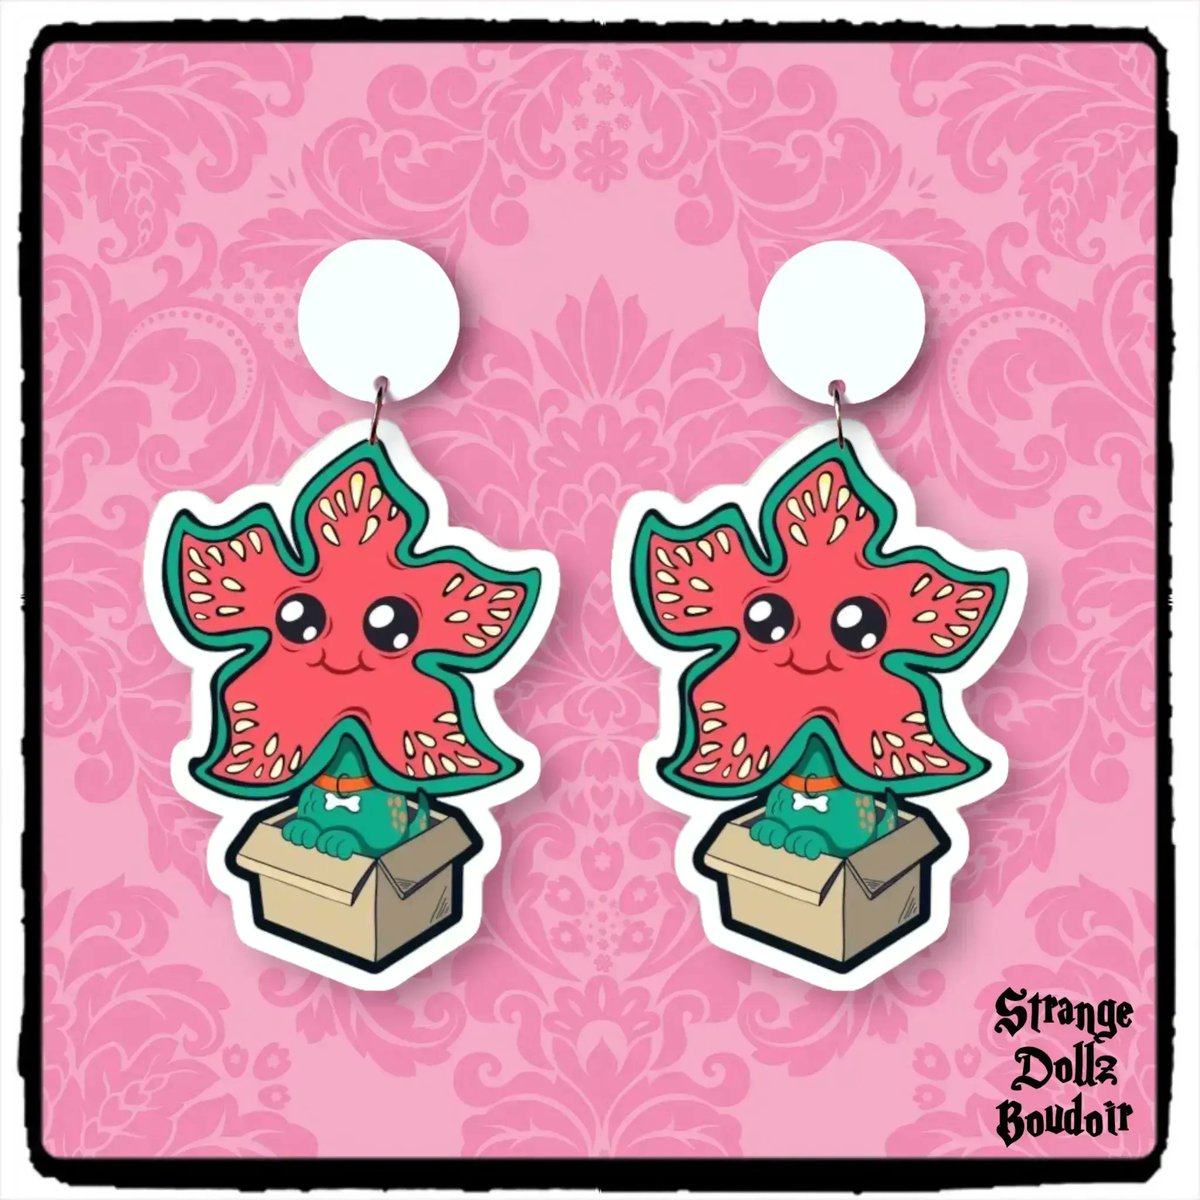 ❤️ These adorable Demogorgon earrings are available in our shop strange-dollz-boudoir.myshopify.com + You can safely add them to your #thronewishlist as we are a #ThronePartnerStore 🦇 #twitch #twitchtv #vtuber #strangerthings #kawaii #LiveStream #ukstreamer